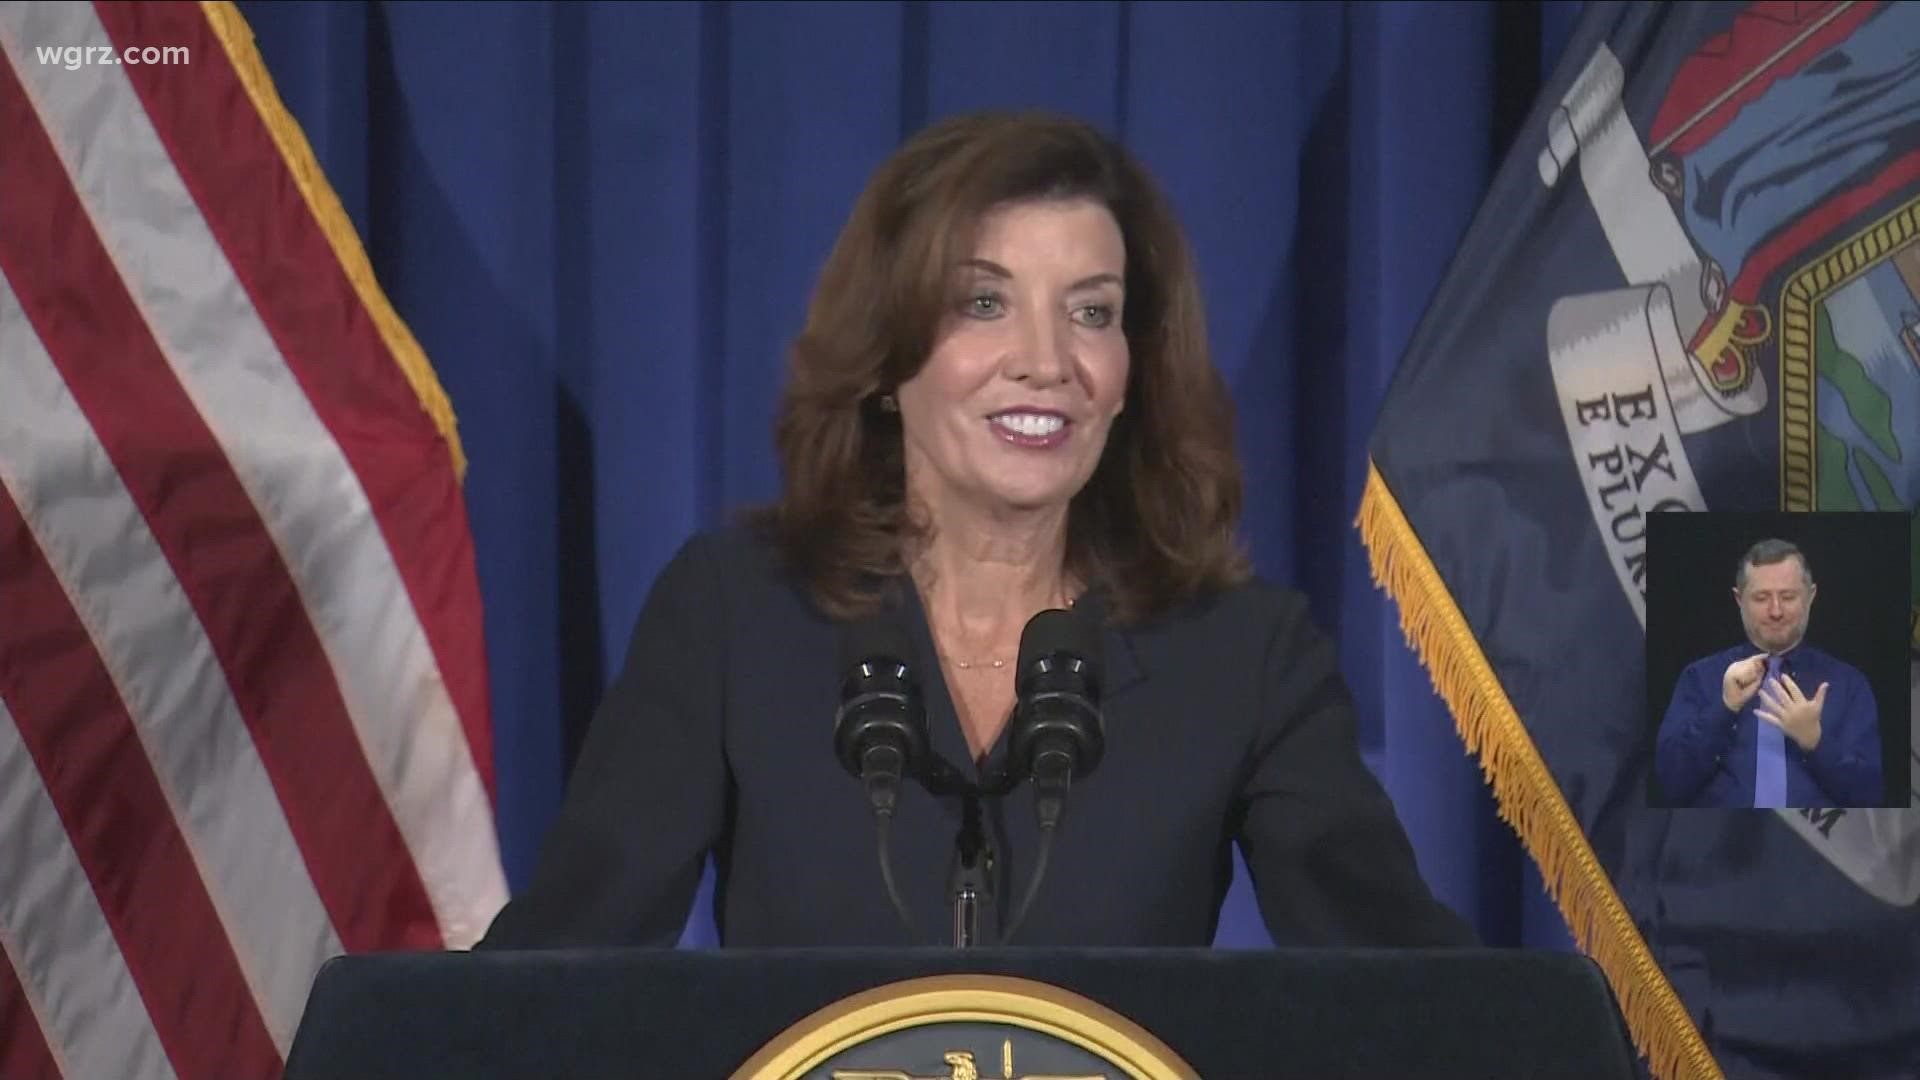 While Hochul is hoping for a smooth transition of power, she is walking into a difficult situation.